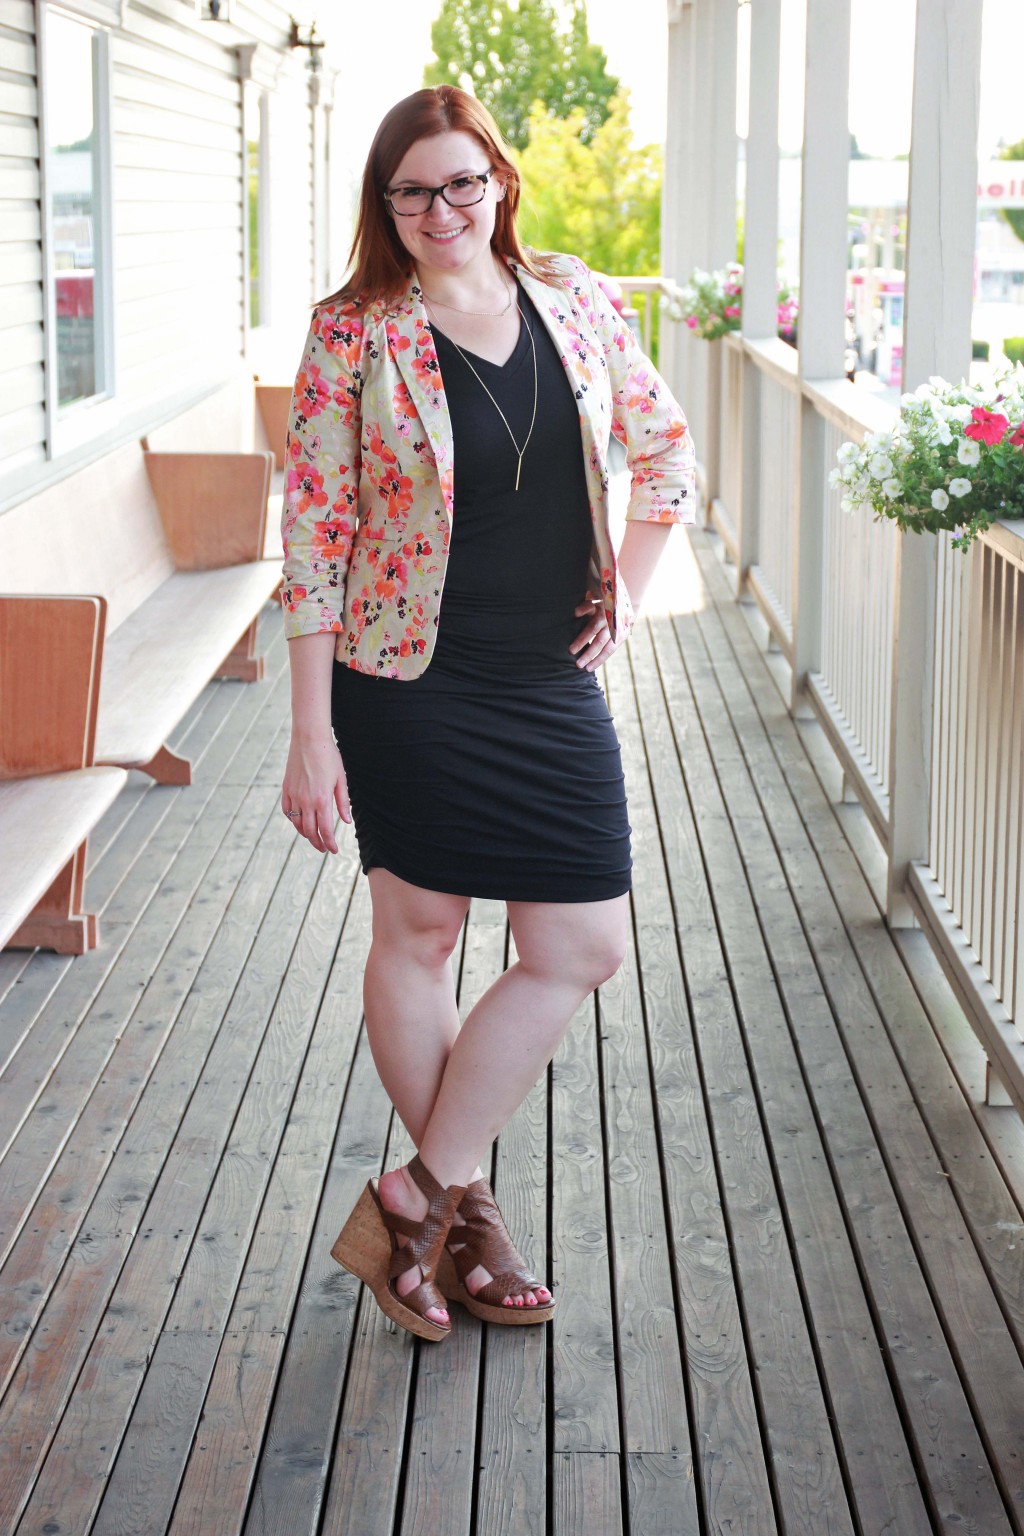 Snohomish style blogger Kate Retherford of All Things Kate